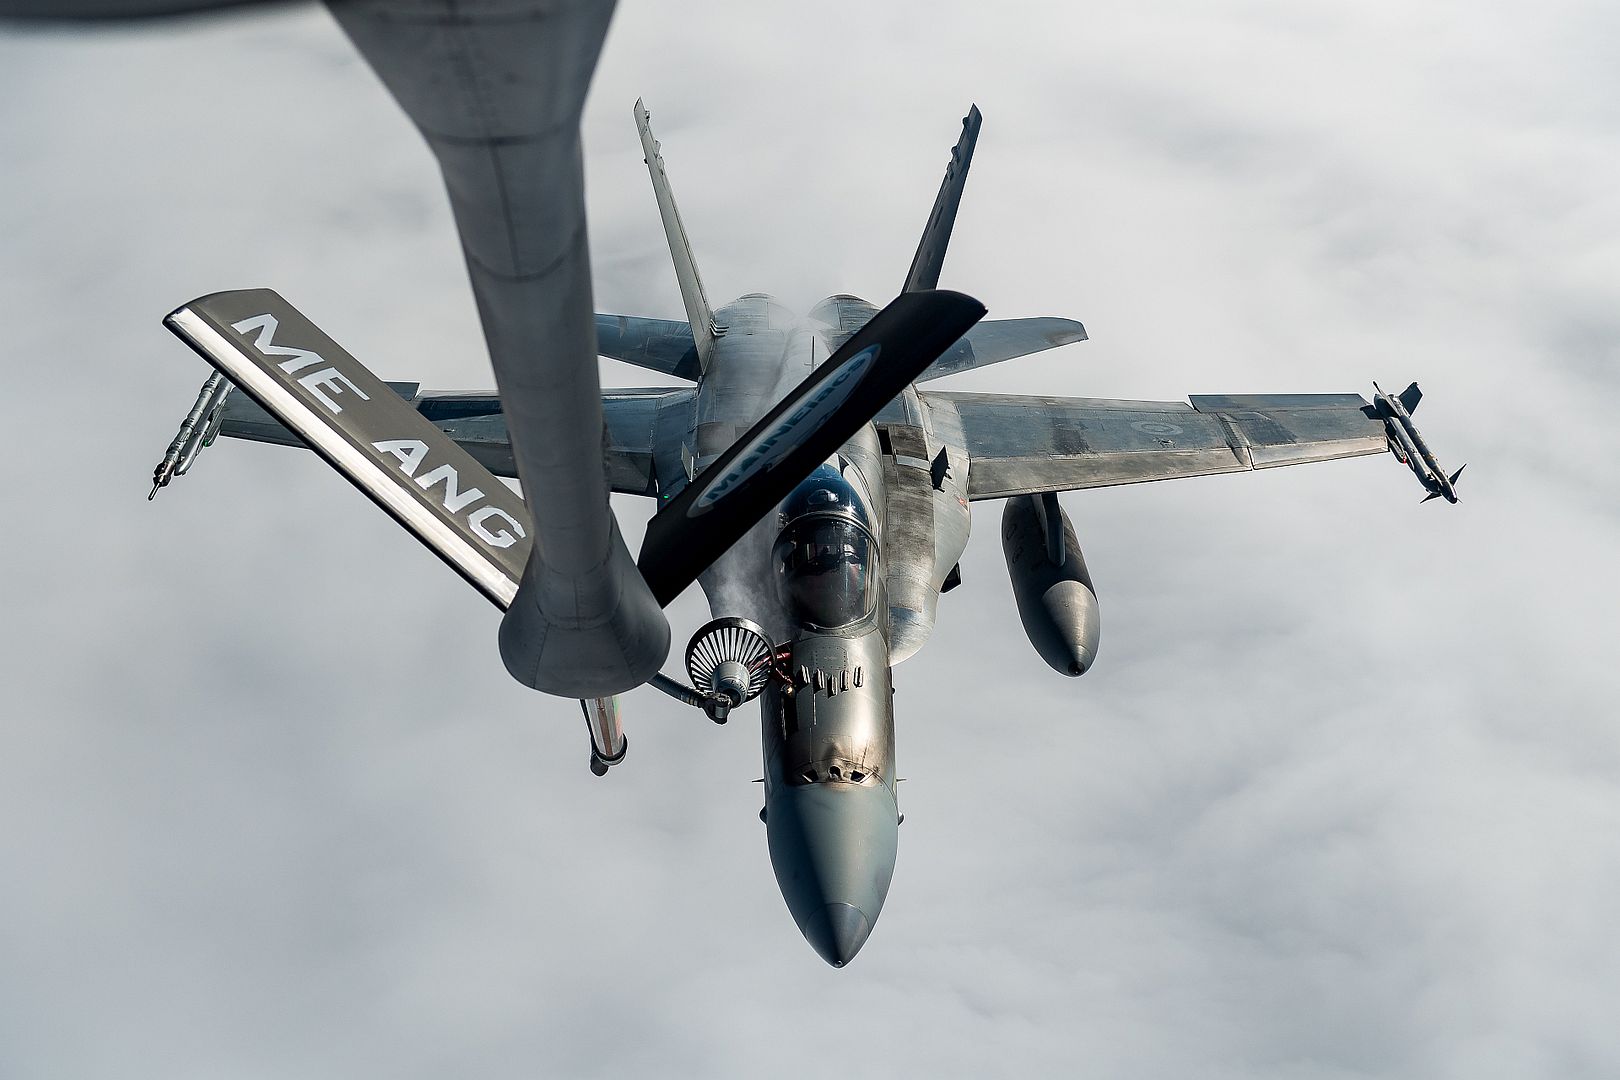 Air Refueling For The North American Air Defense Command Exercise AMALGAM HAWK Conducted On Wednesday May 26 2021